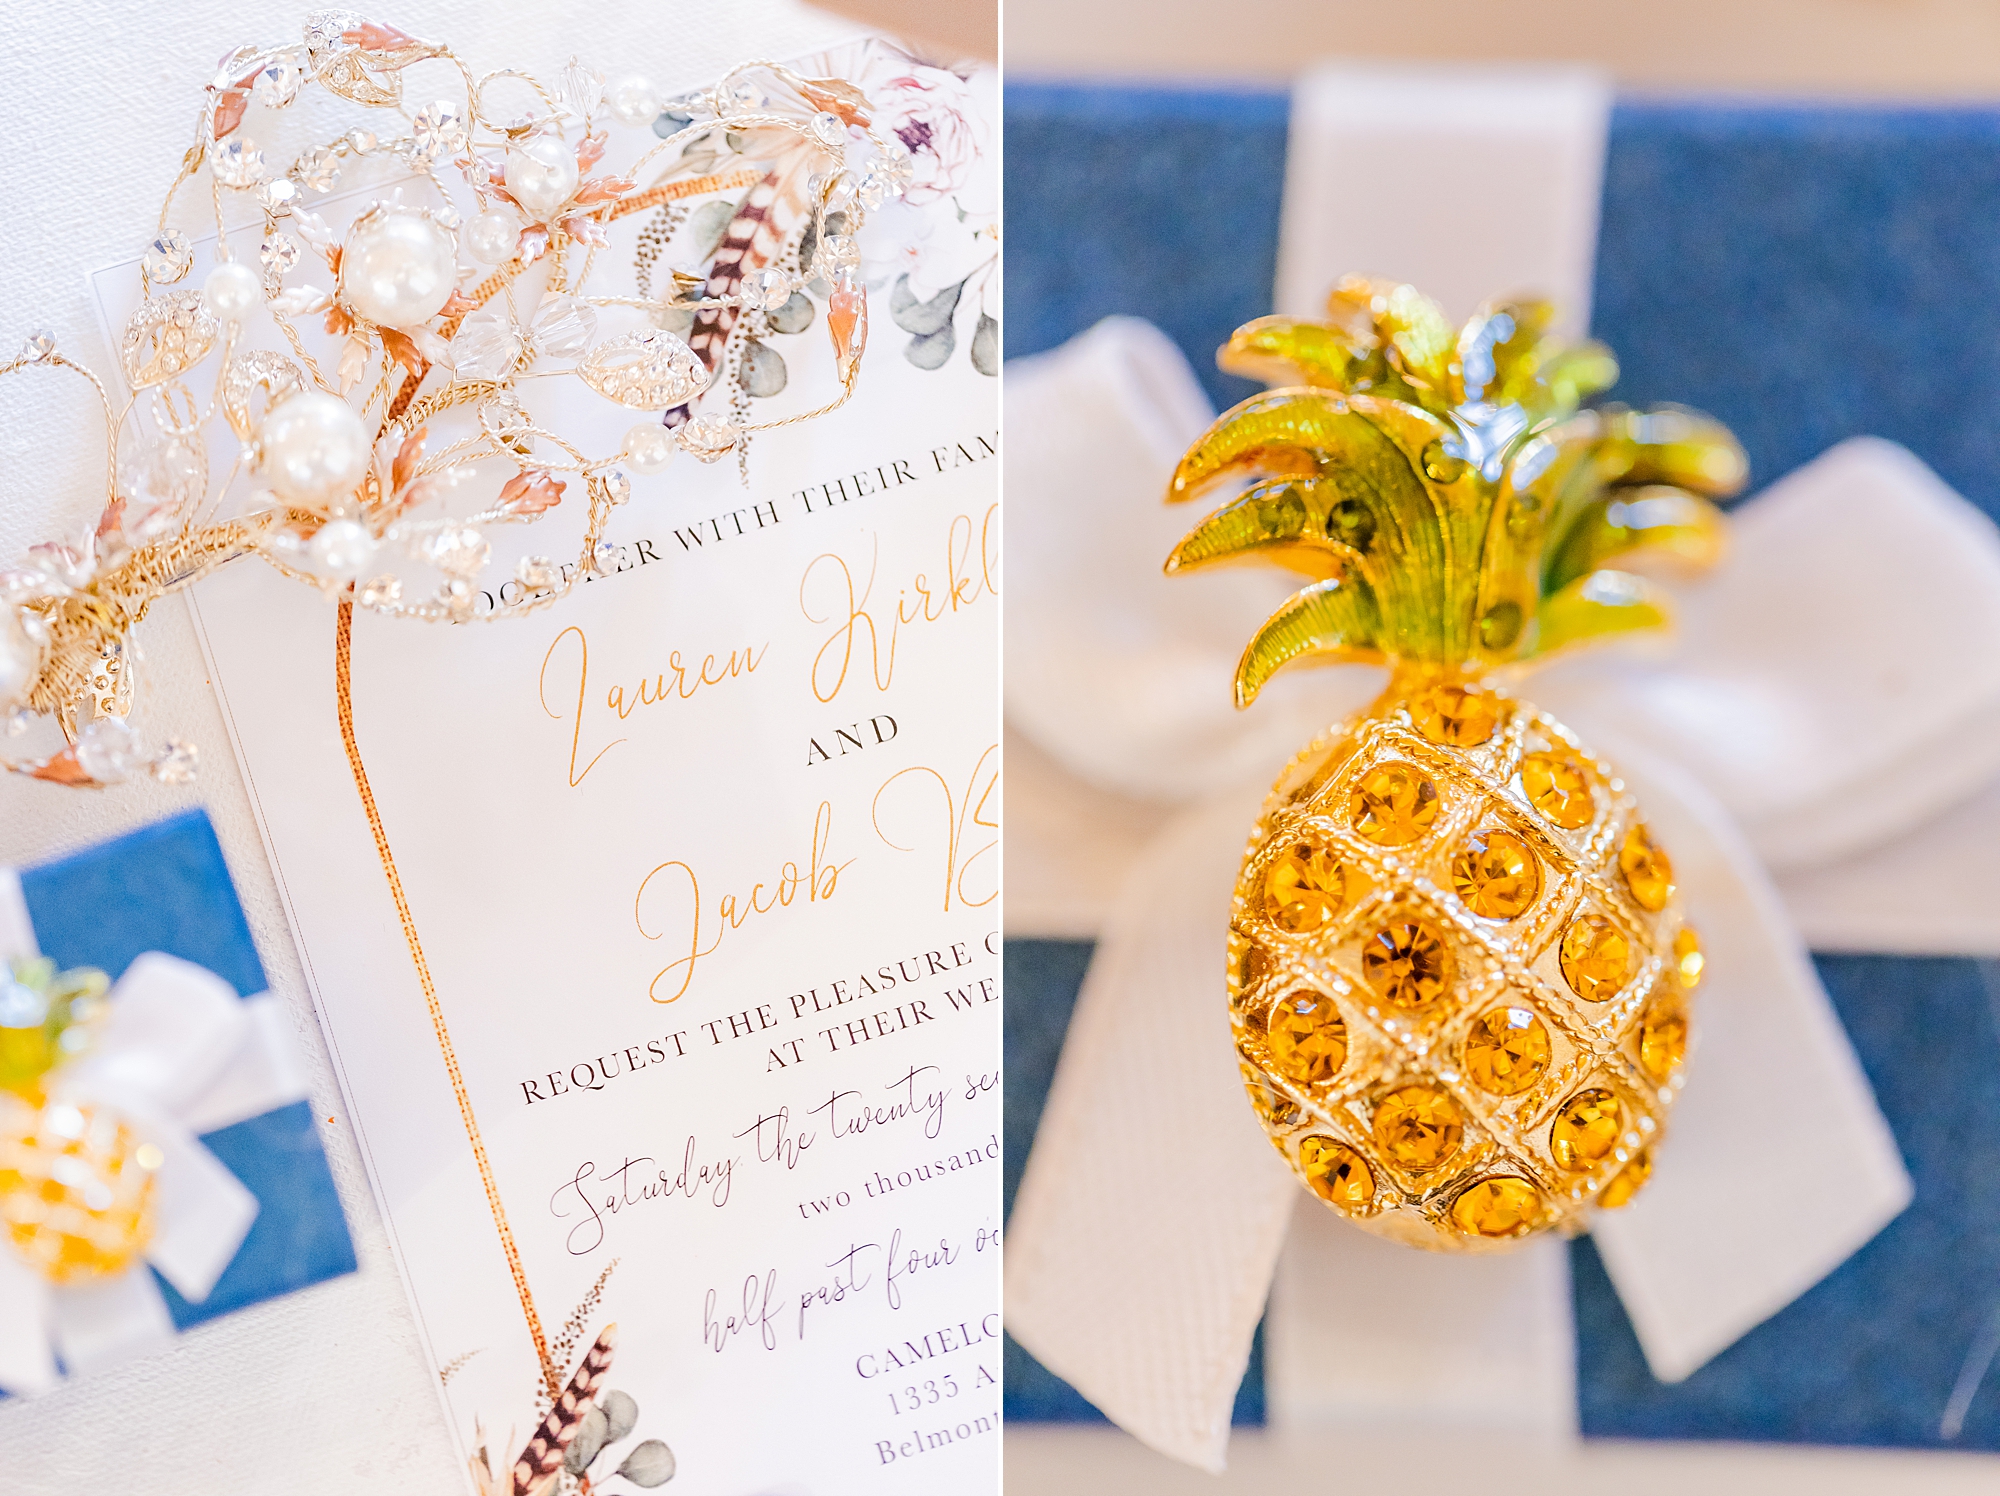 bejeweled pineapple sits on gift for wedding day